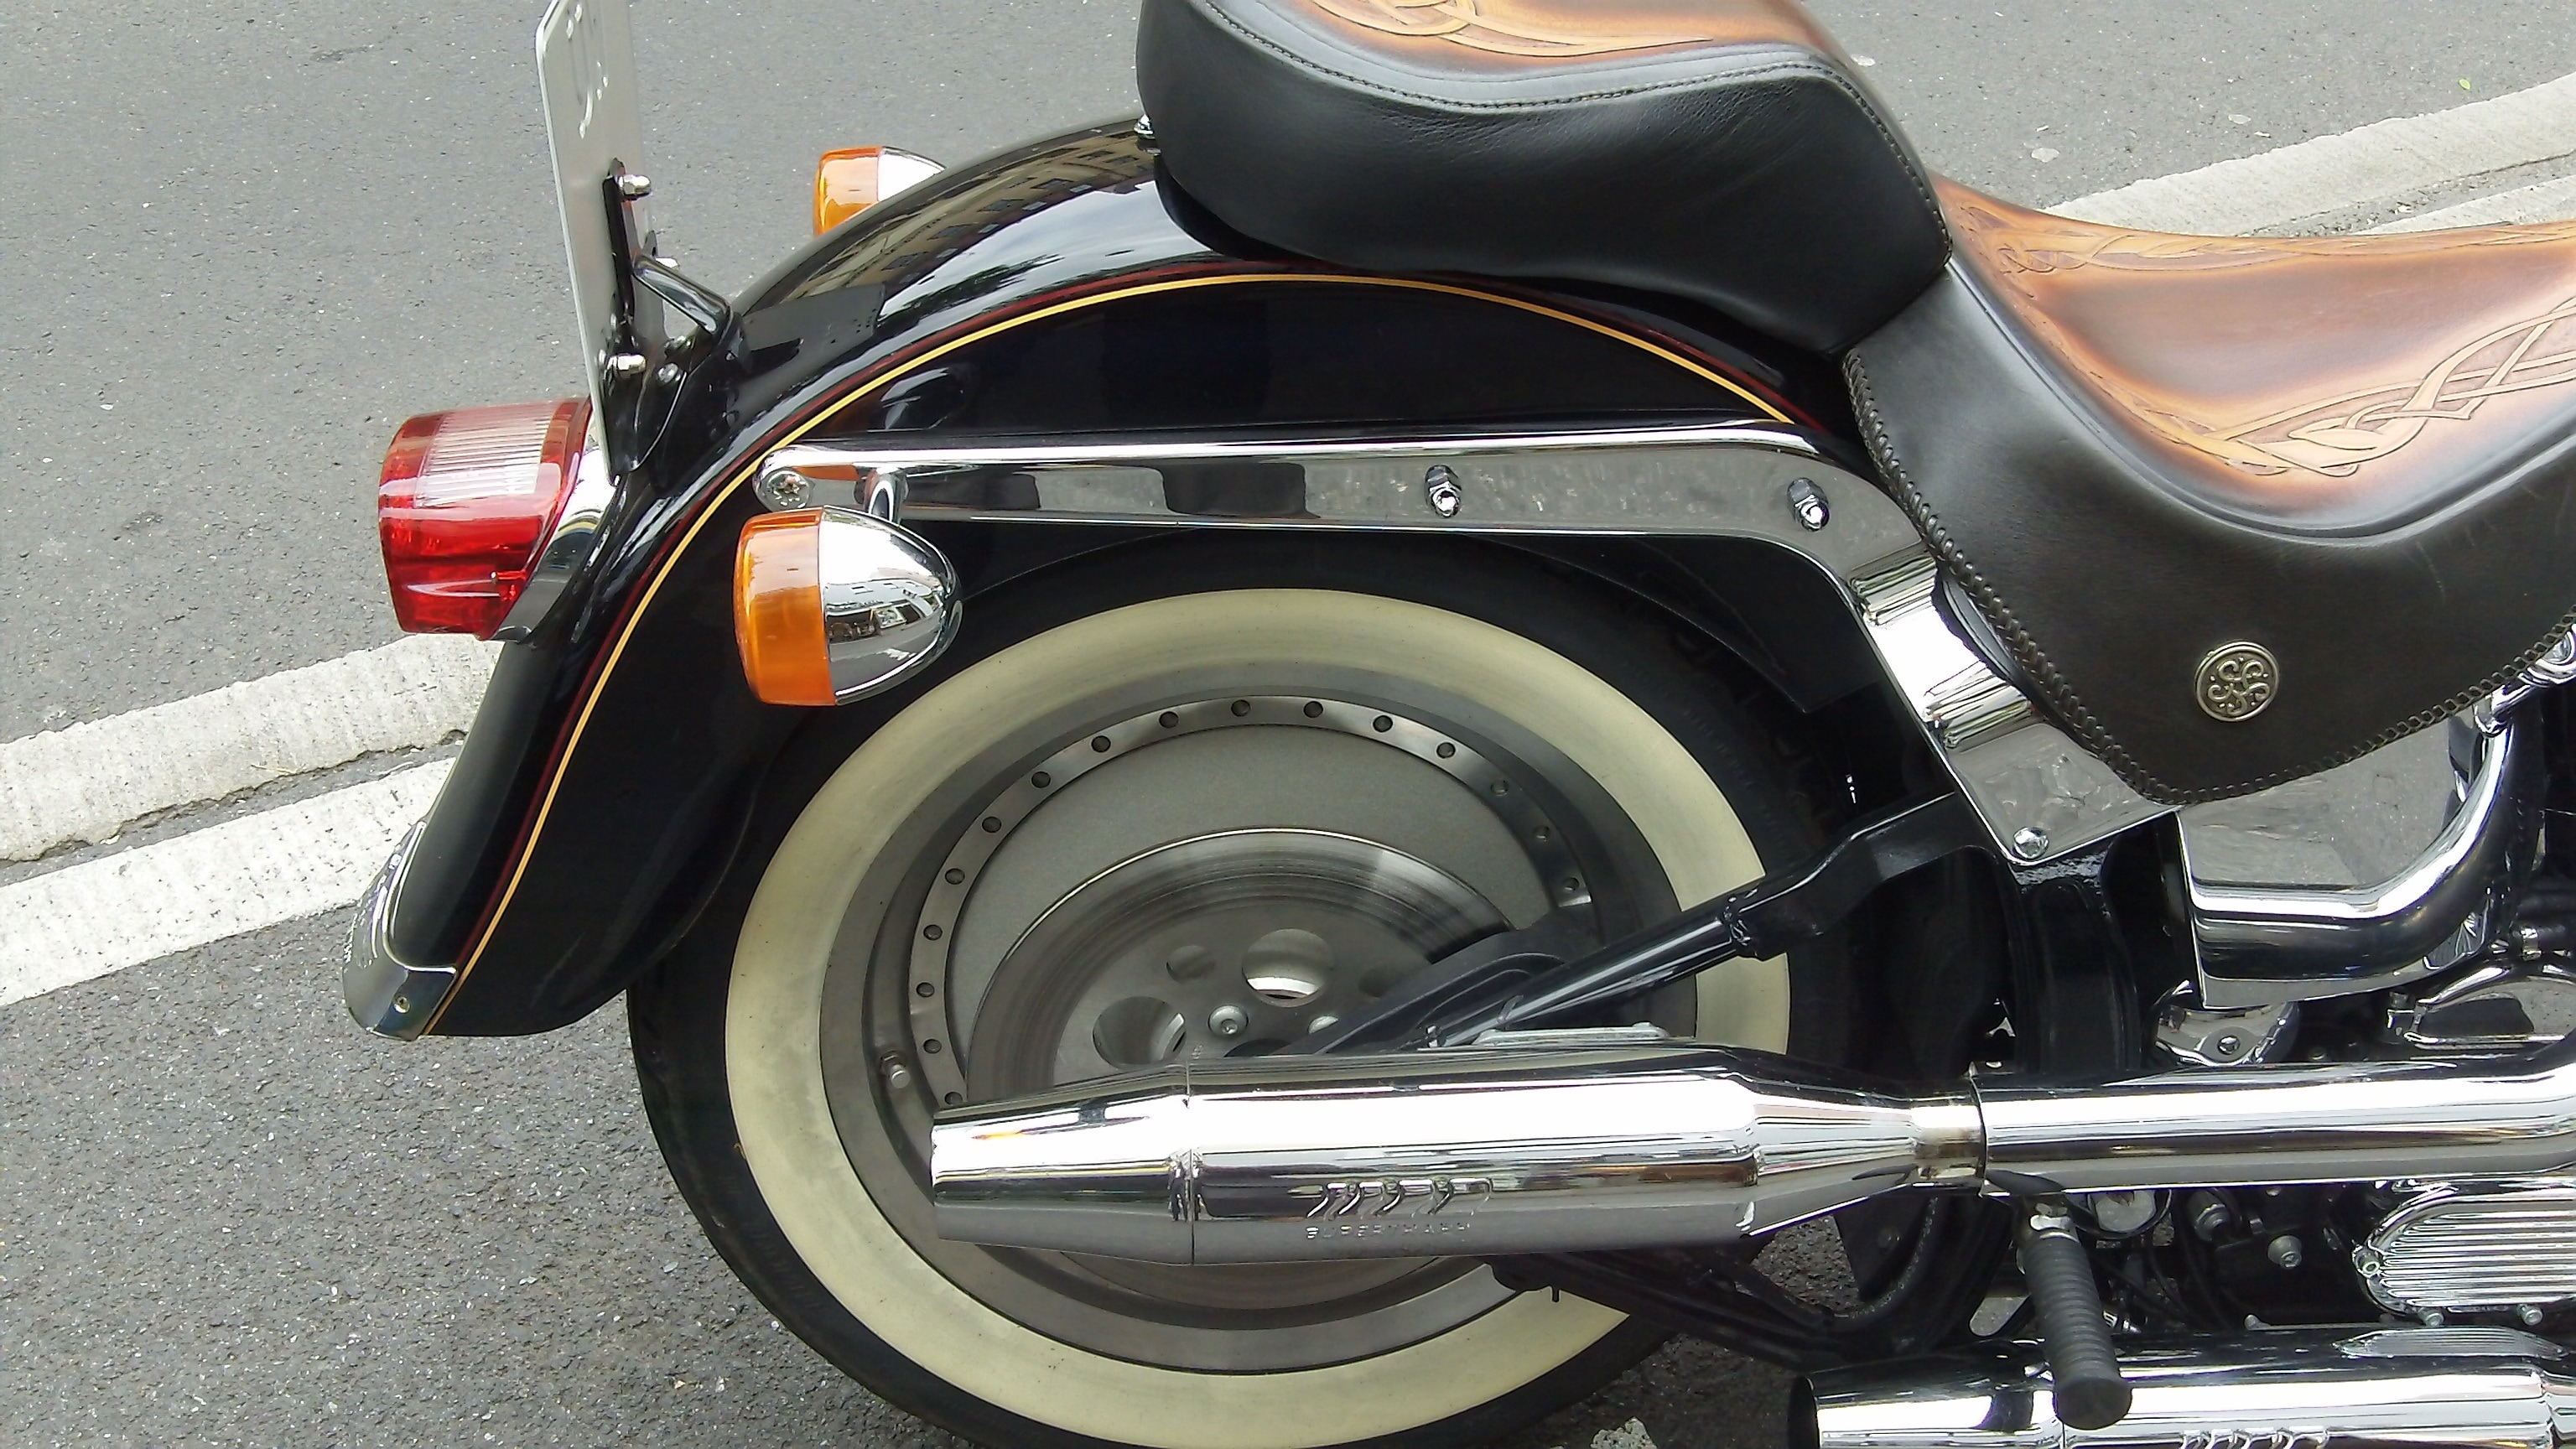 black and brown cruiser motorcycle